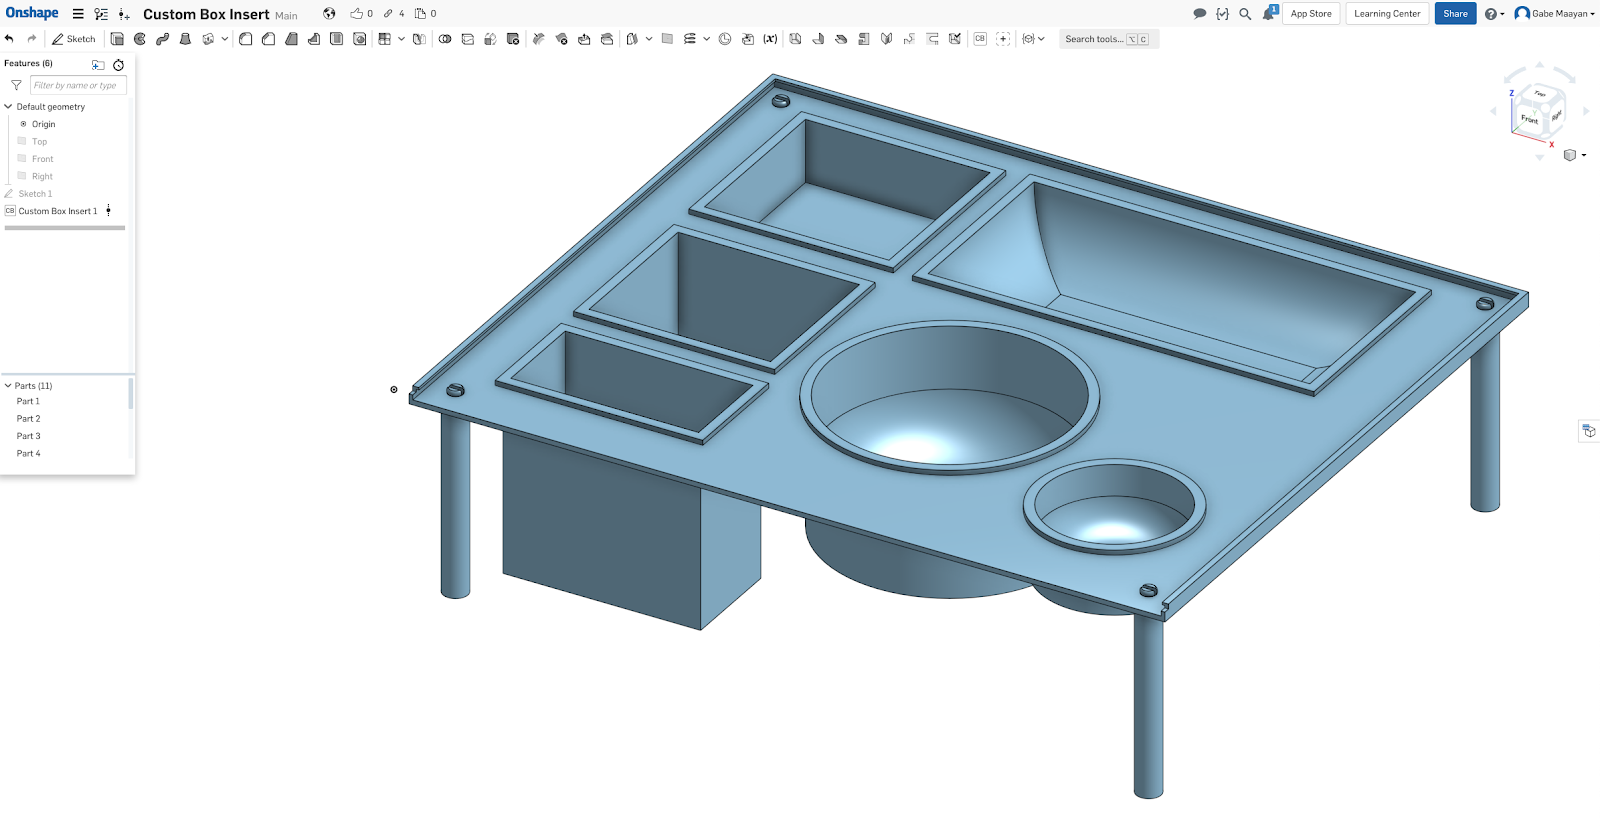 Screenshot of Gabe Maayan's custom Onshape feature for box inserts that he created in the 2019 Onshape FeatureScript hackathon.